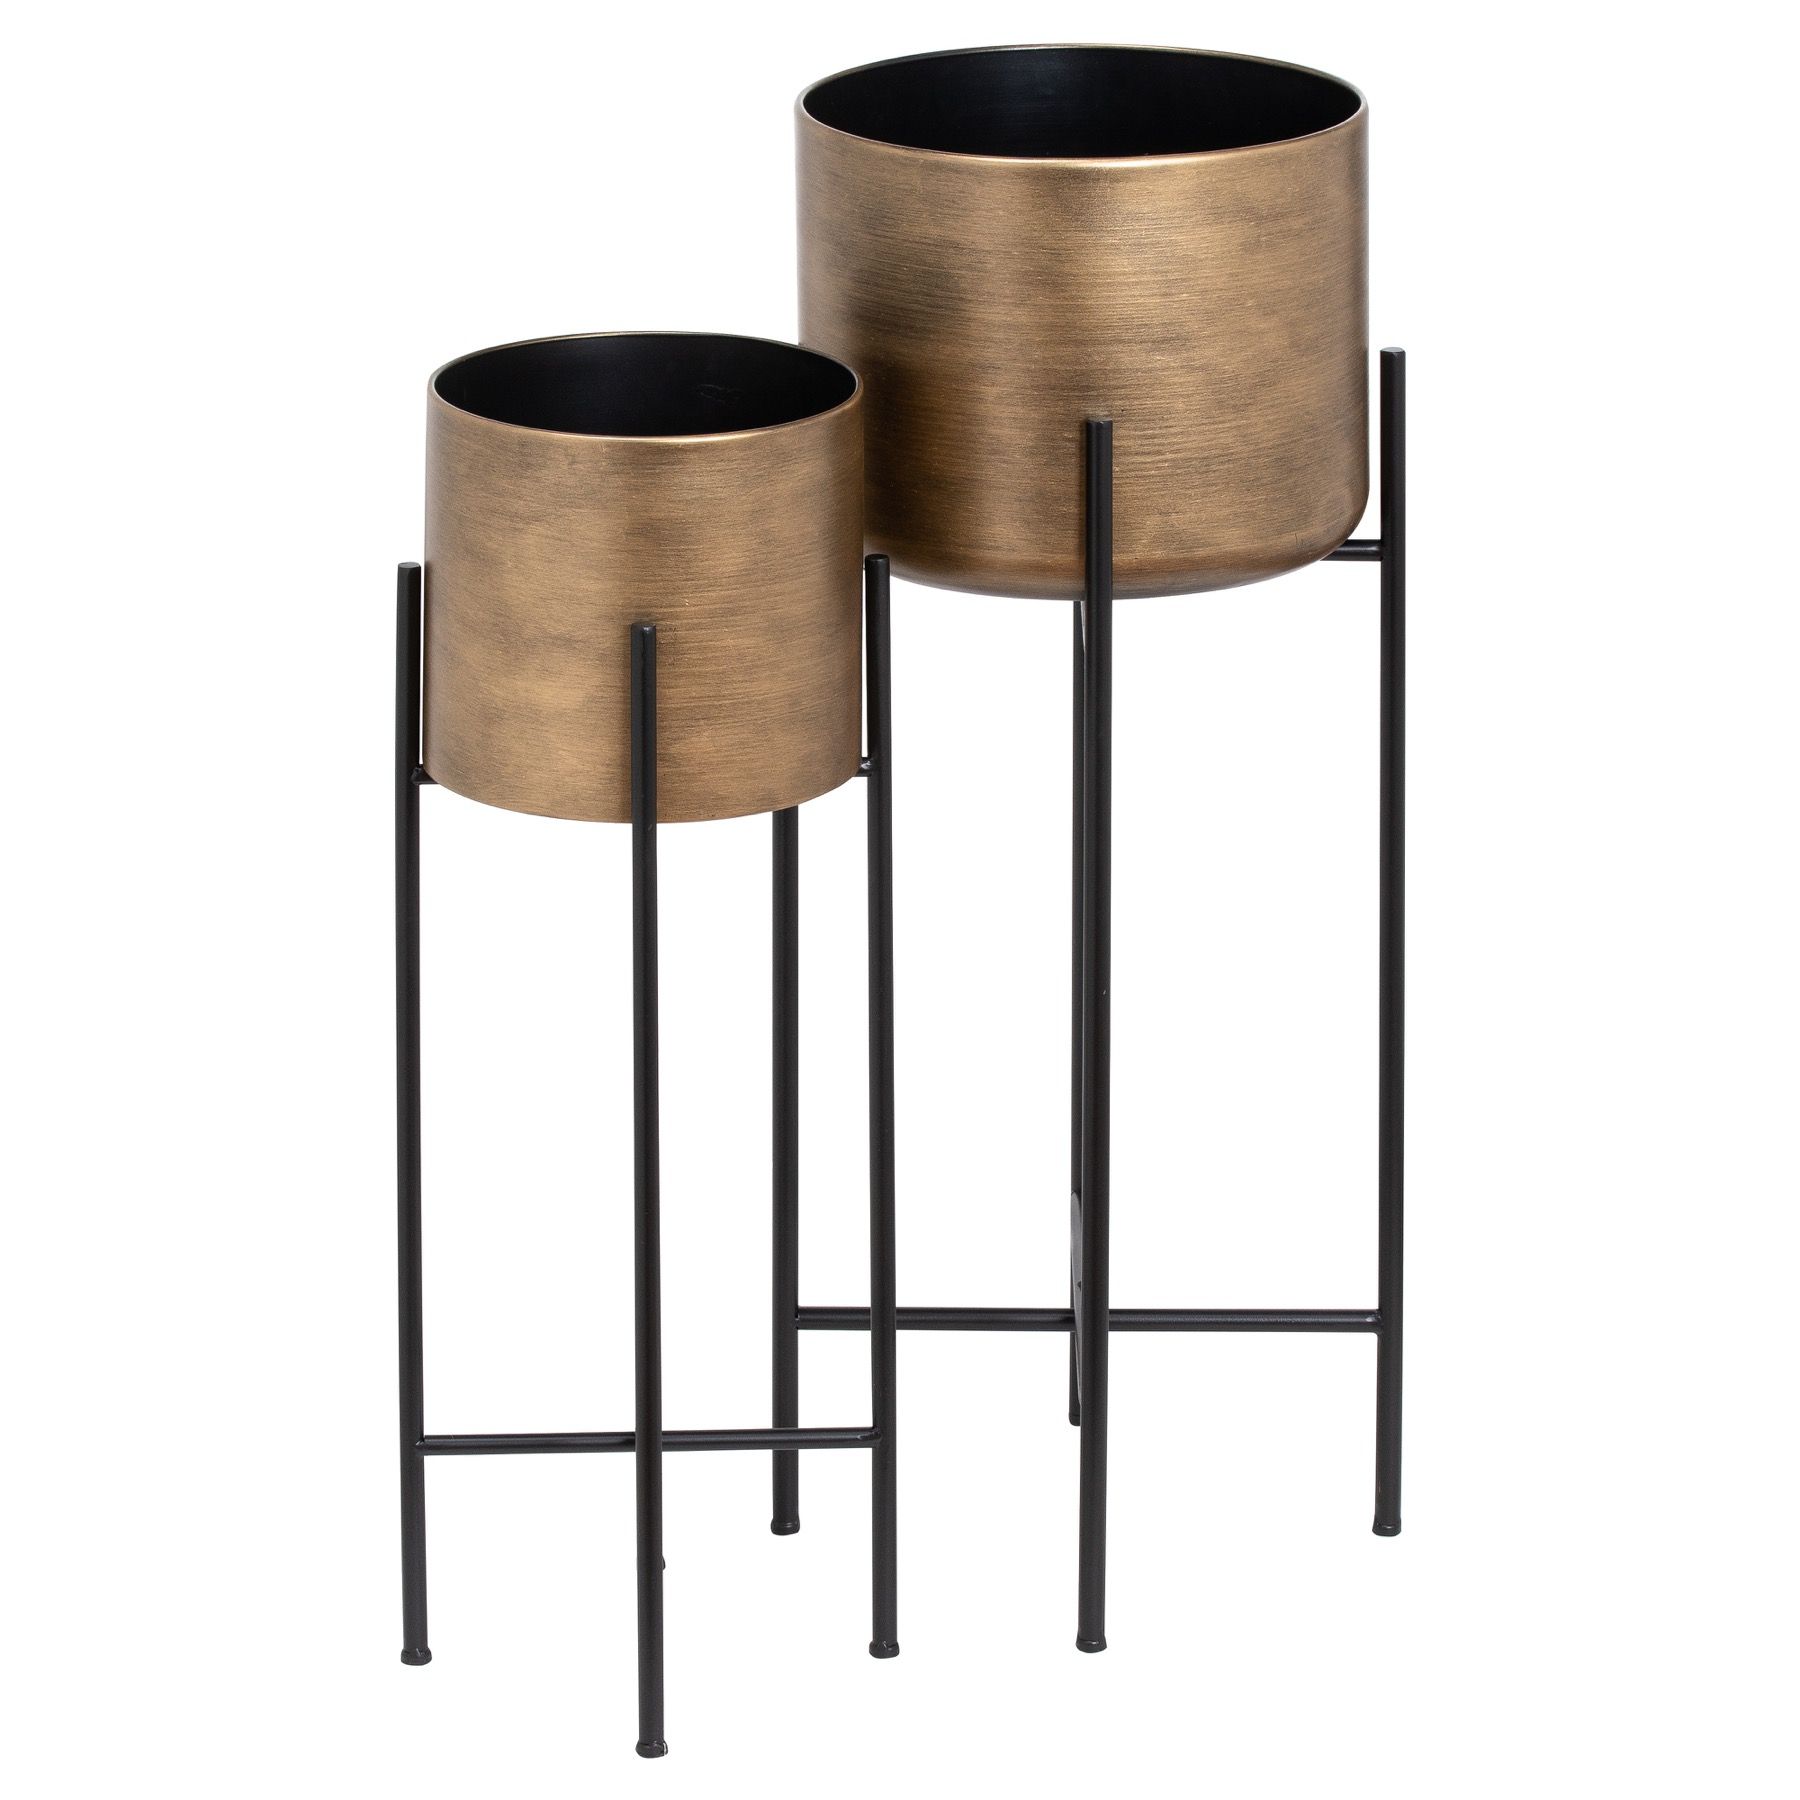 Set Of Two Bronze Planters On Stand | Wholesalehill Interiors Regarding Bronze Plant Stands (View 7 of 15)